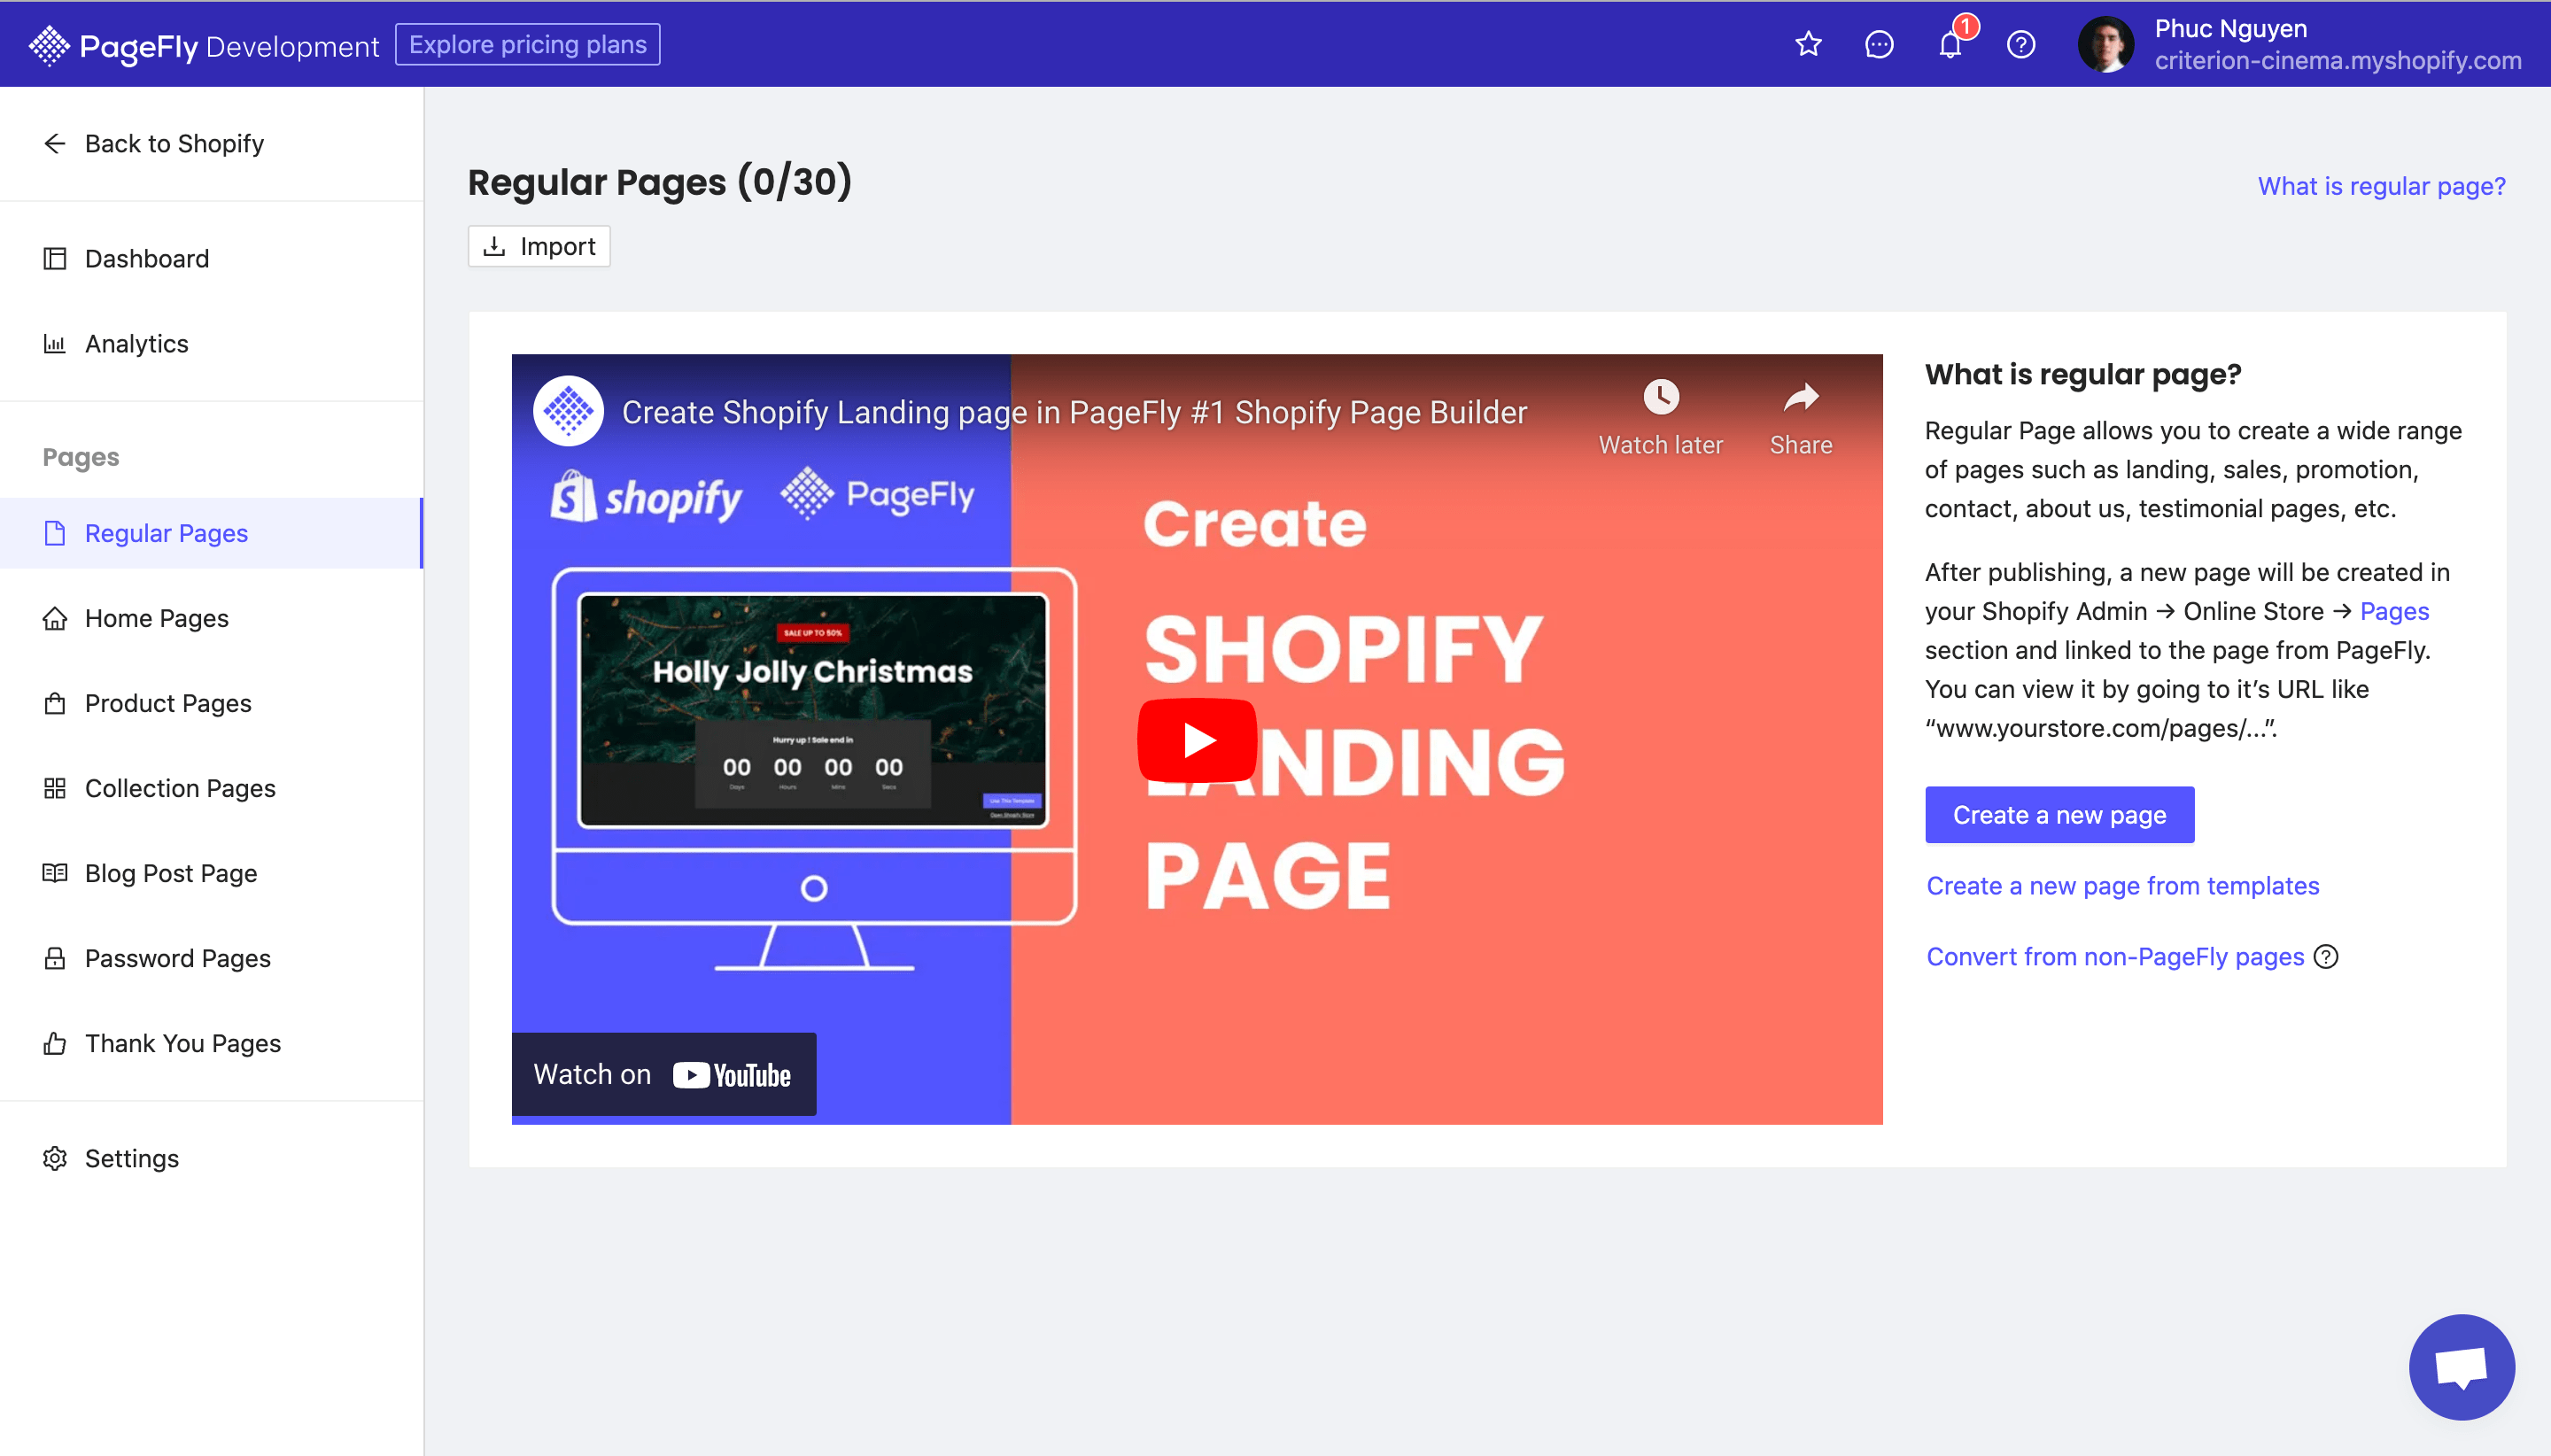 Create new page with PageFly